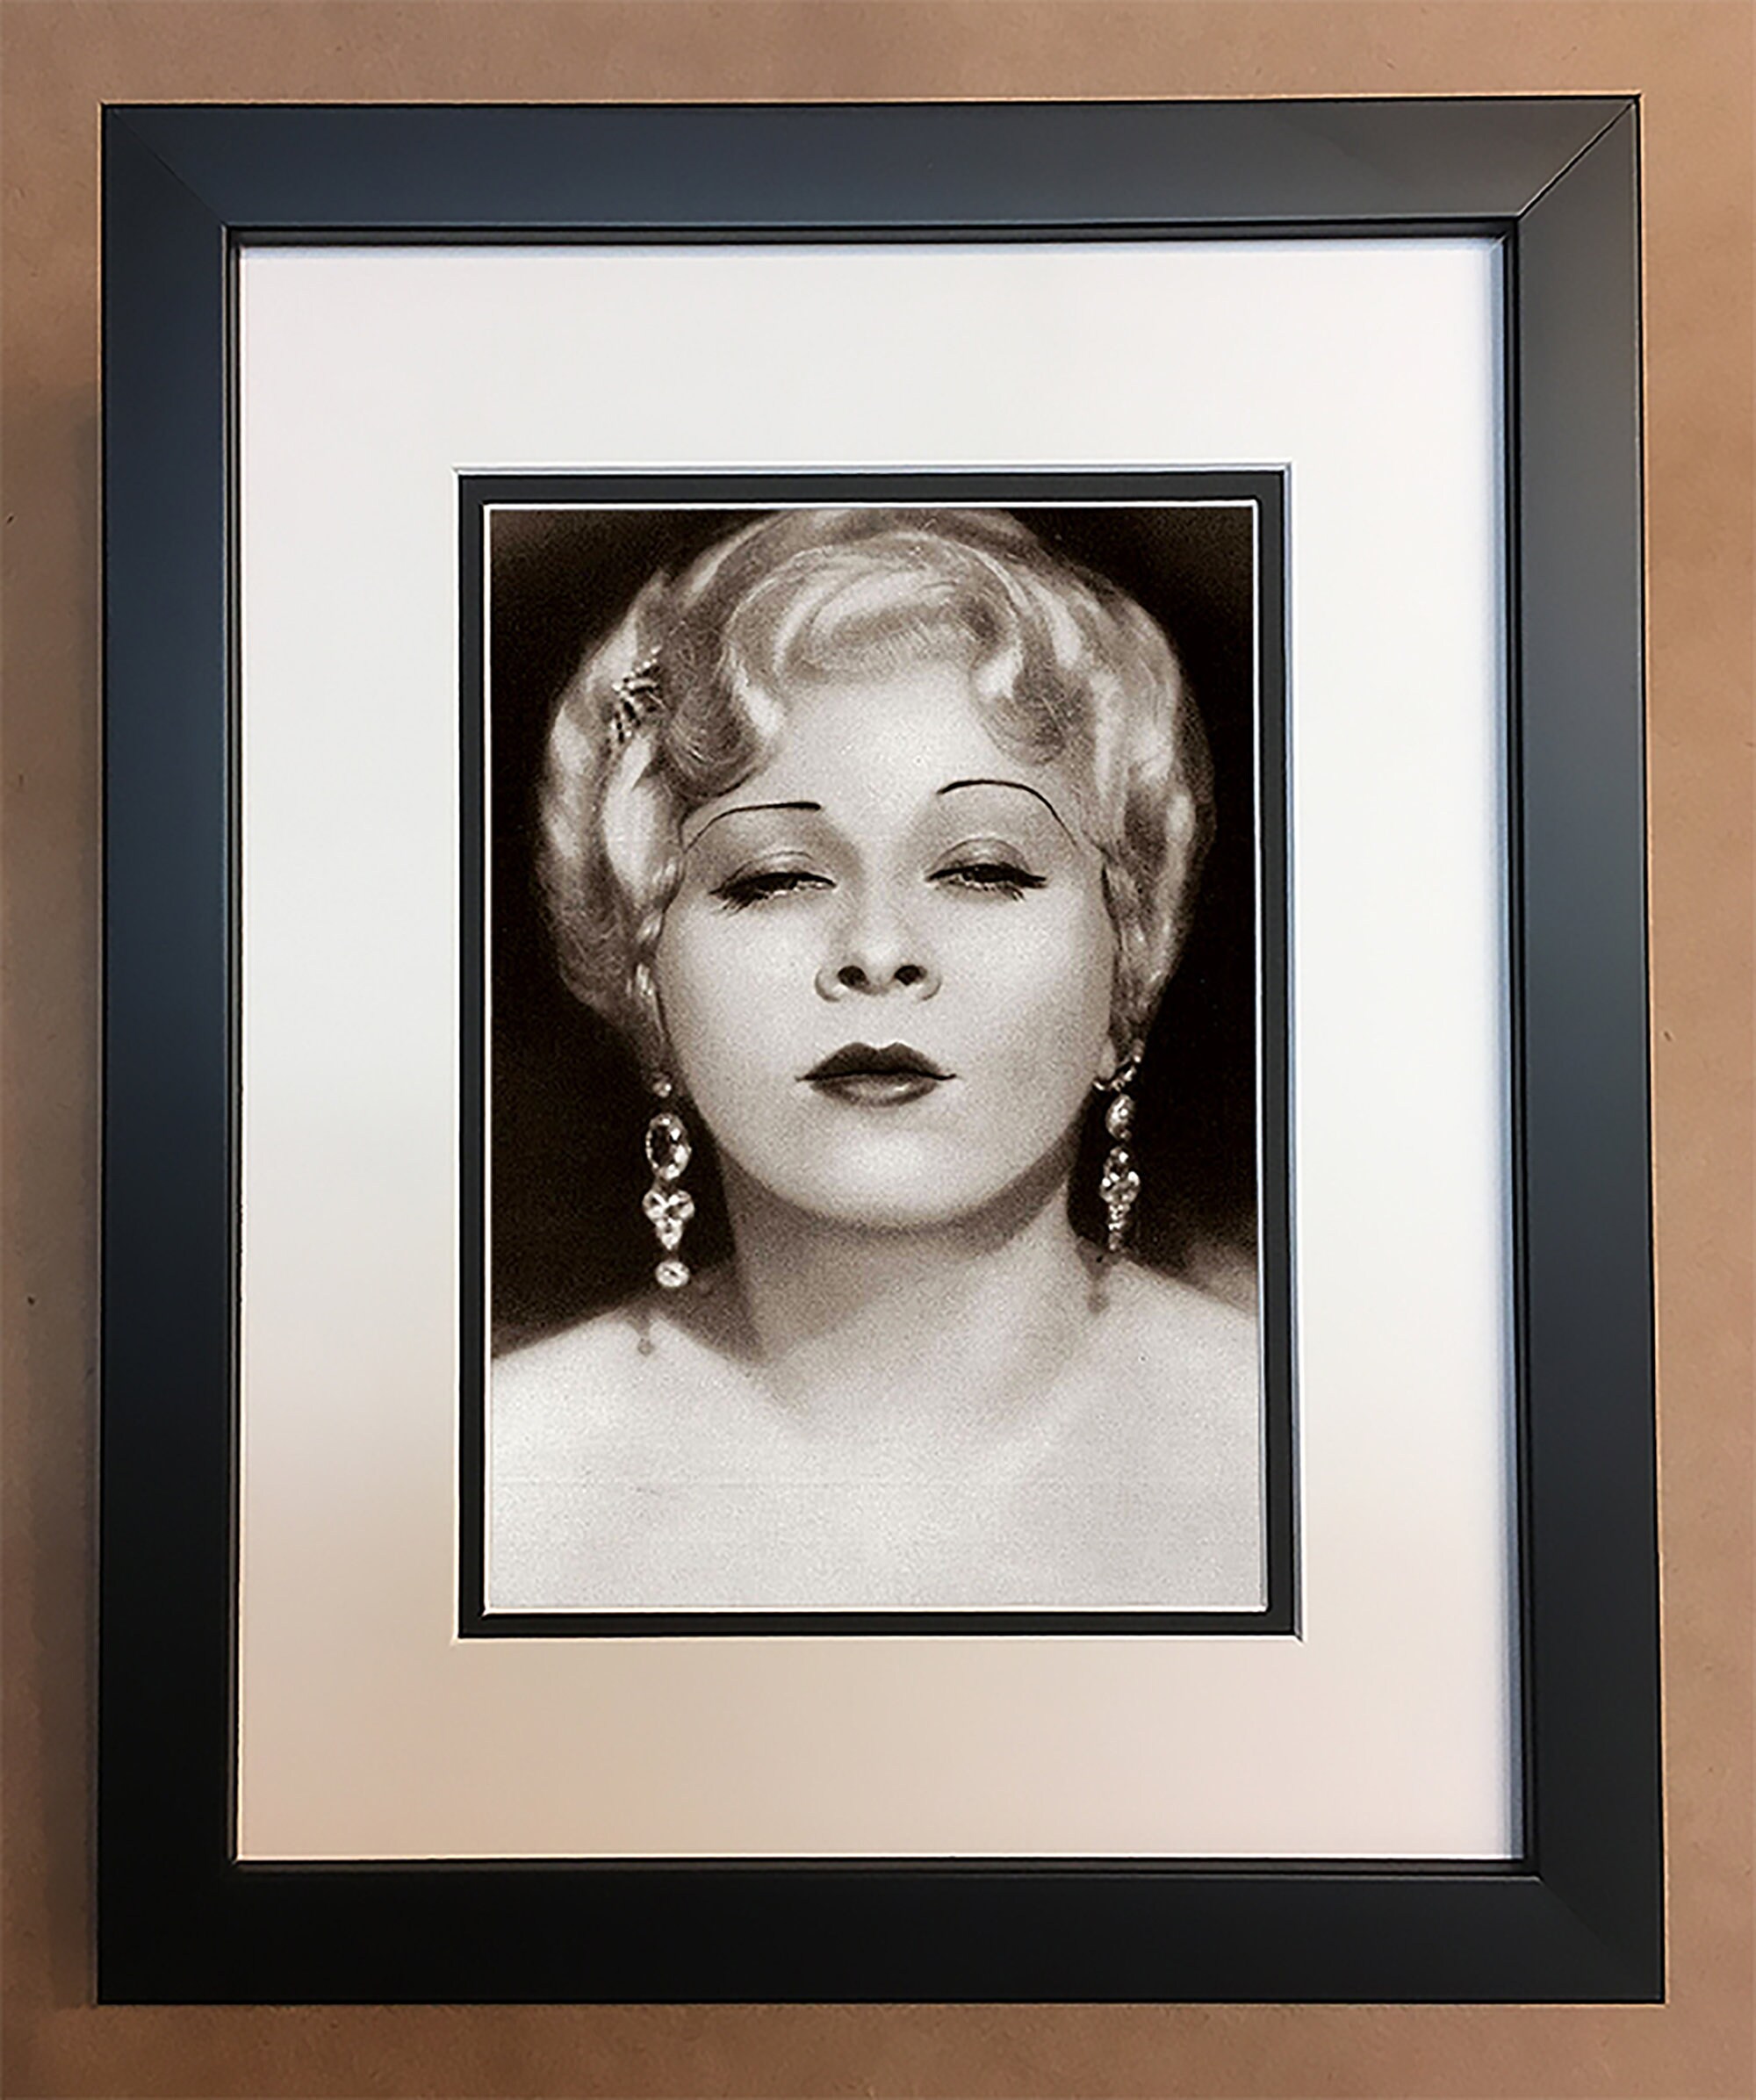 Mae West Black and White Photo Professionally Framed Matted | Etsy